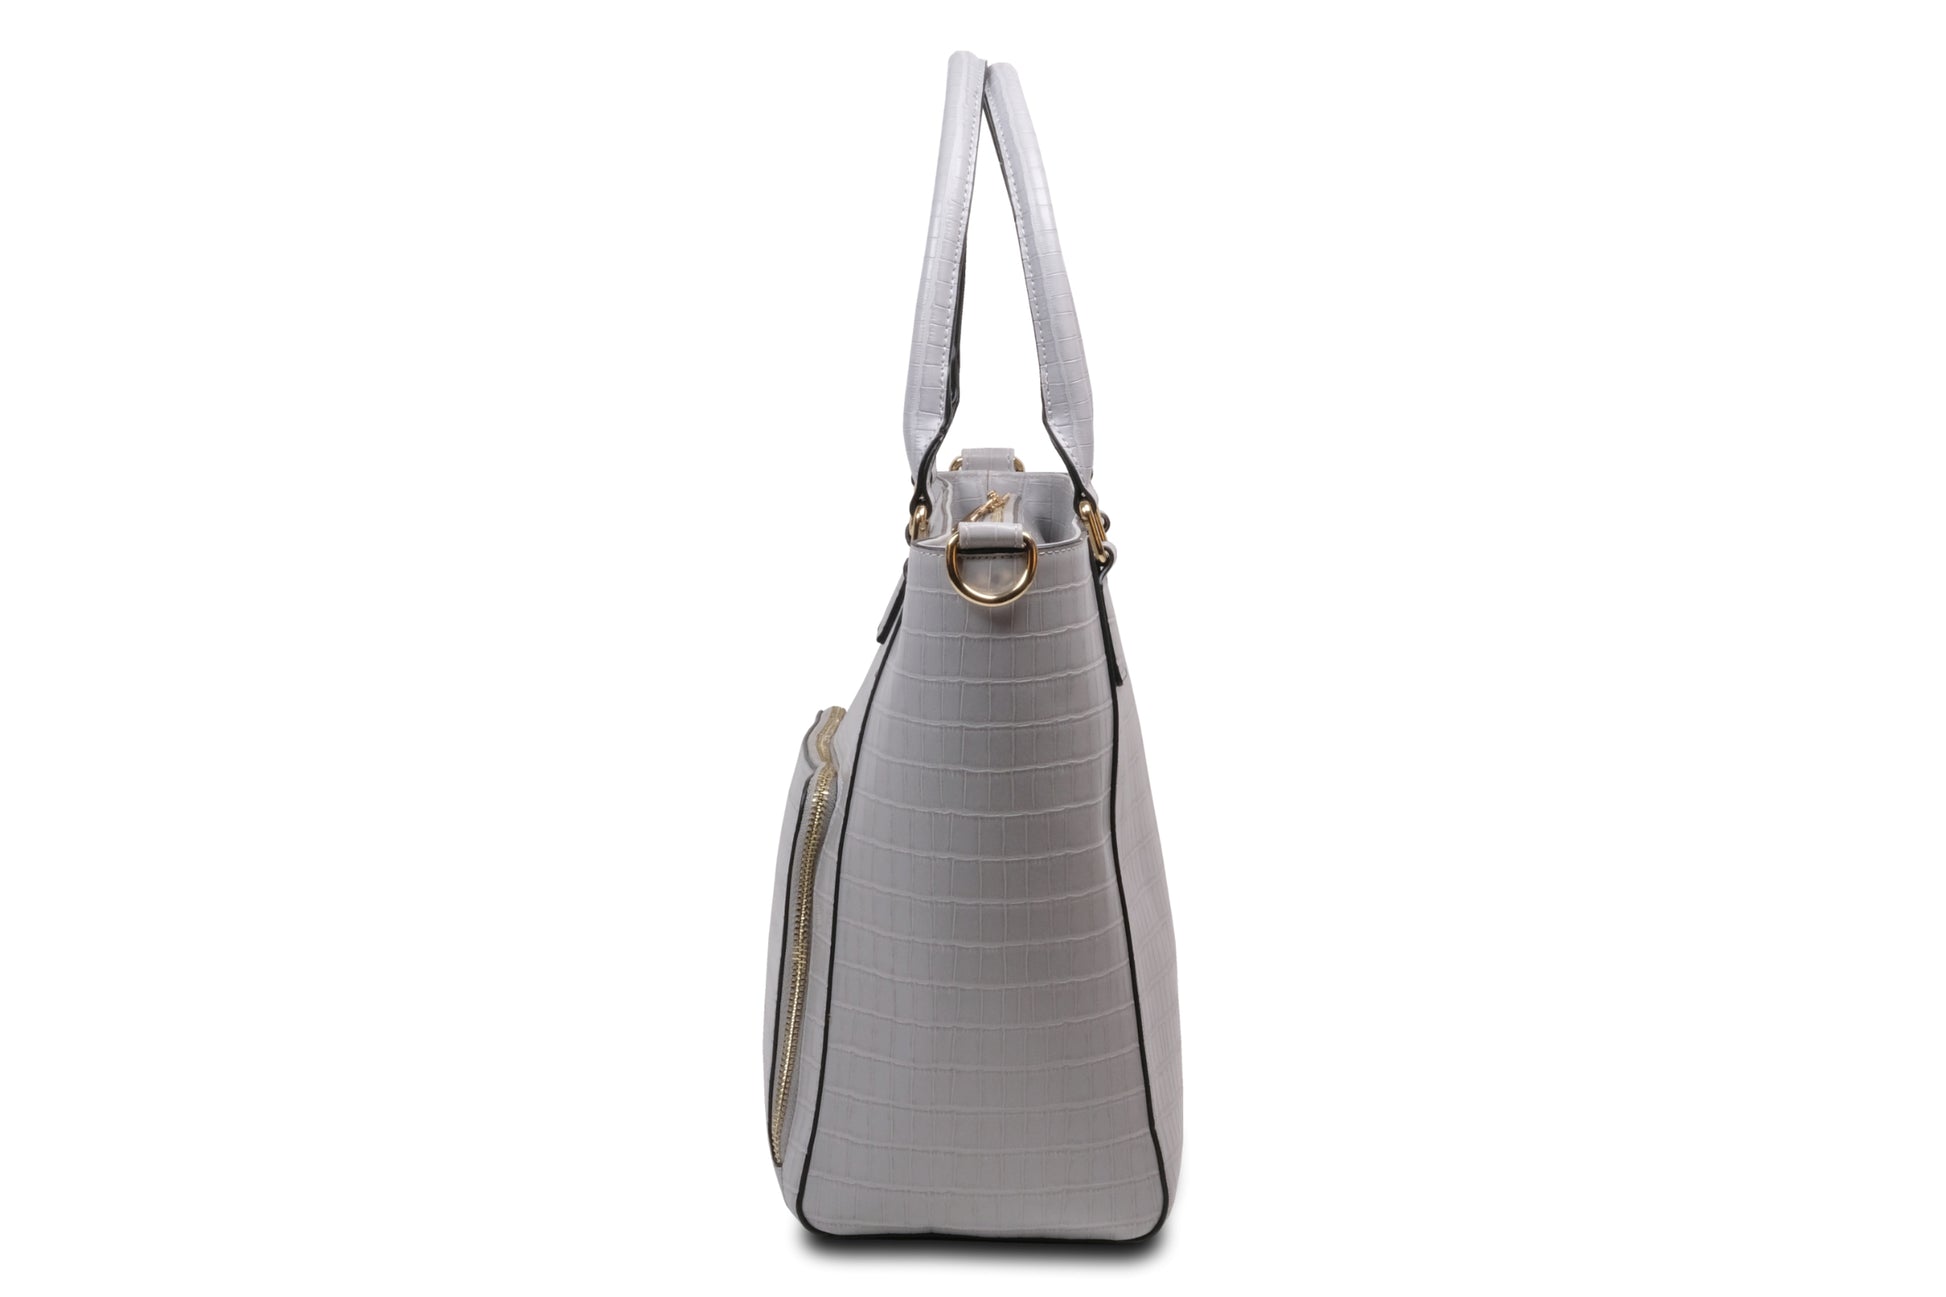 Tiara Faux Leather Gray Tote Bag Handbag made by Dewi Maya side view available at the best boutique in Upstate South Carolina Spartanburg Greenville Dewi Maya Boutique